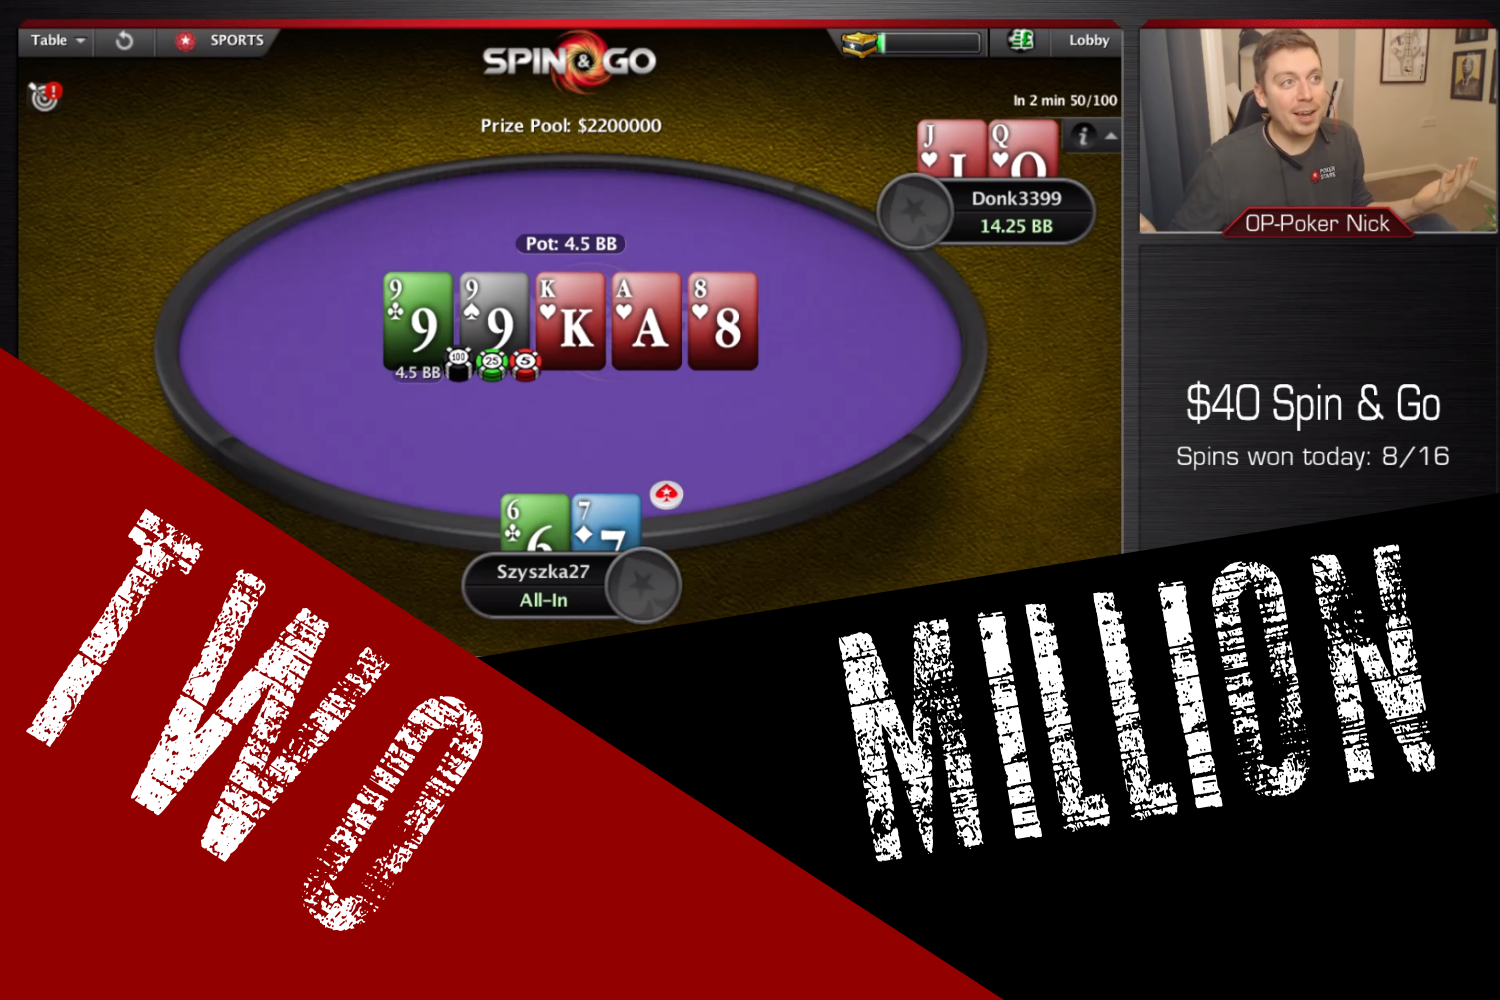 German Player Wins the Biggest PokerStars Spin & Go Jackpot Prize